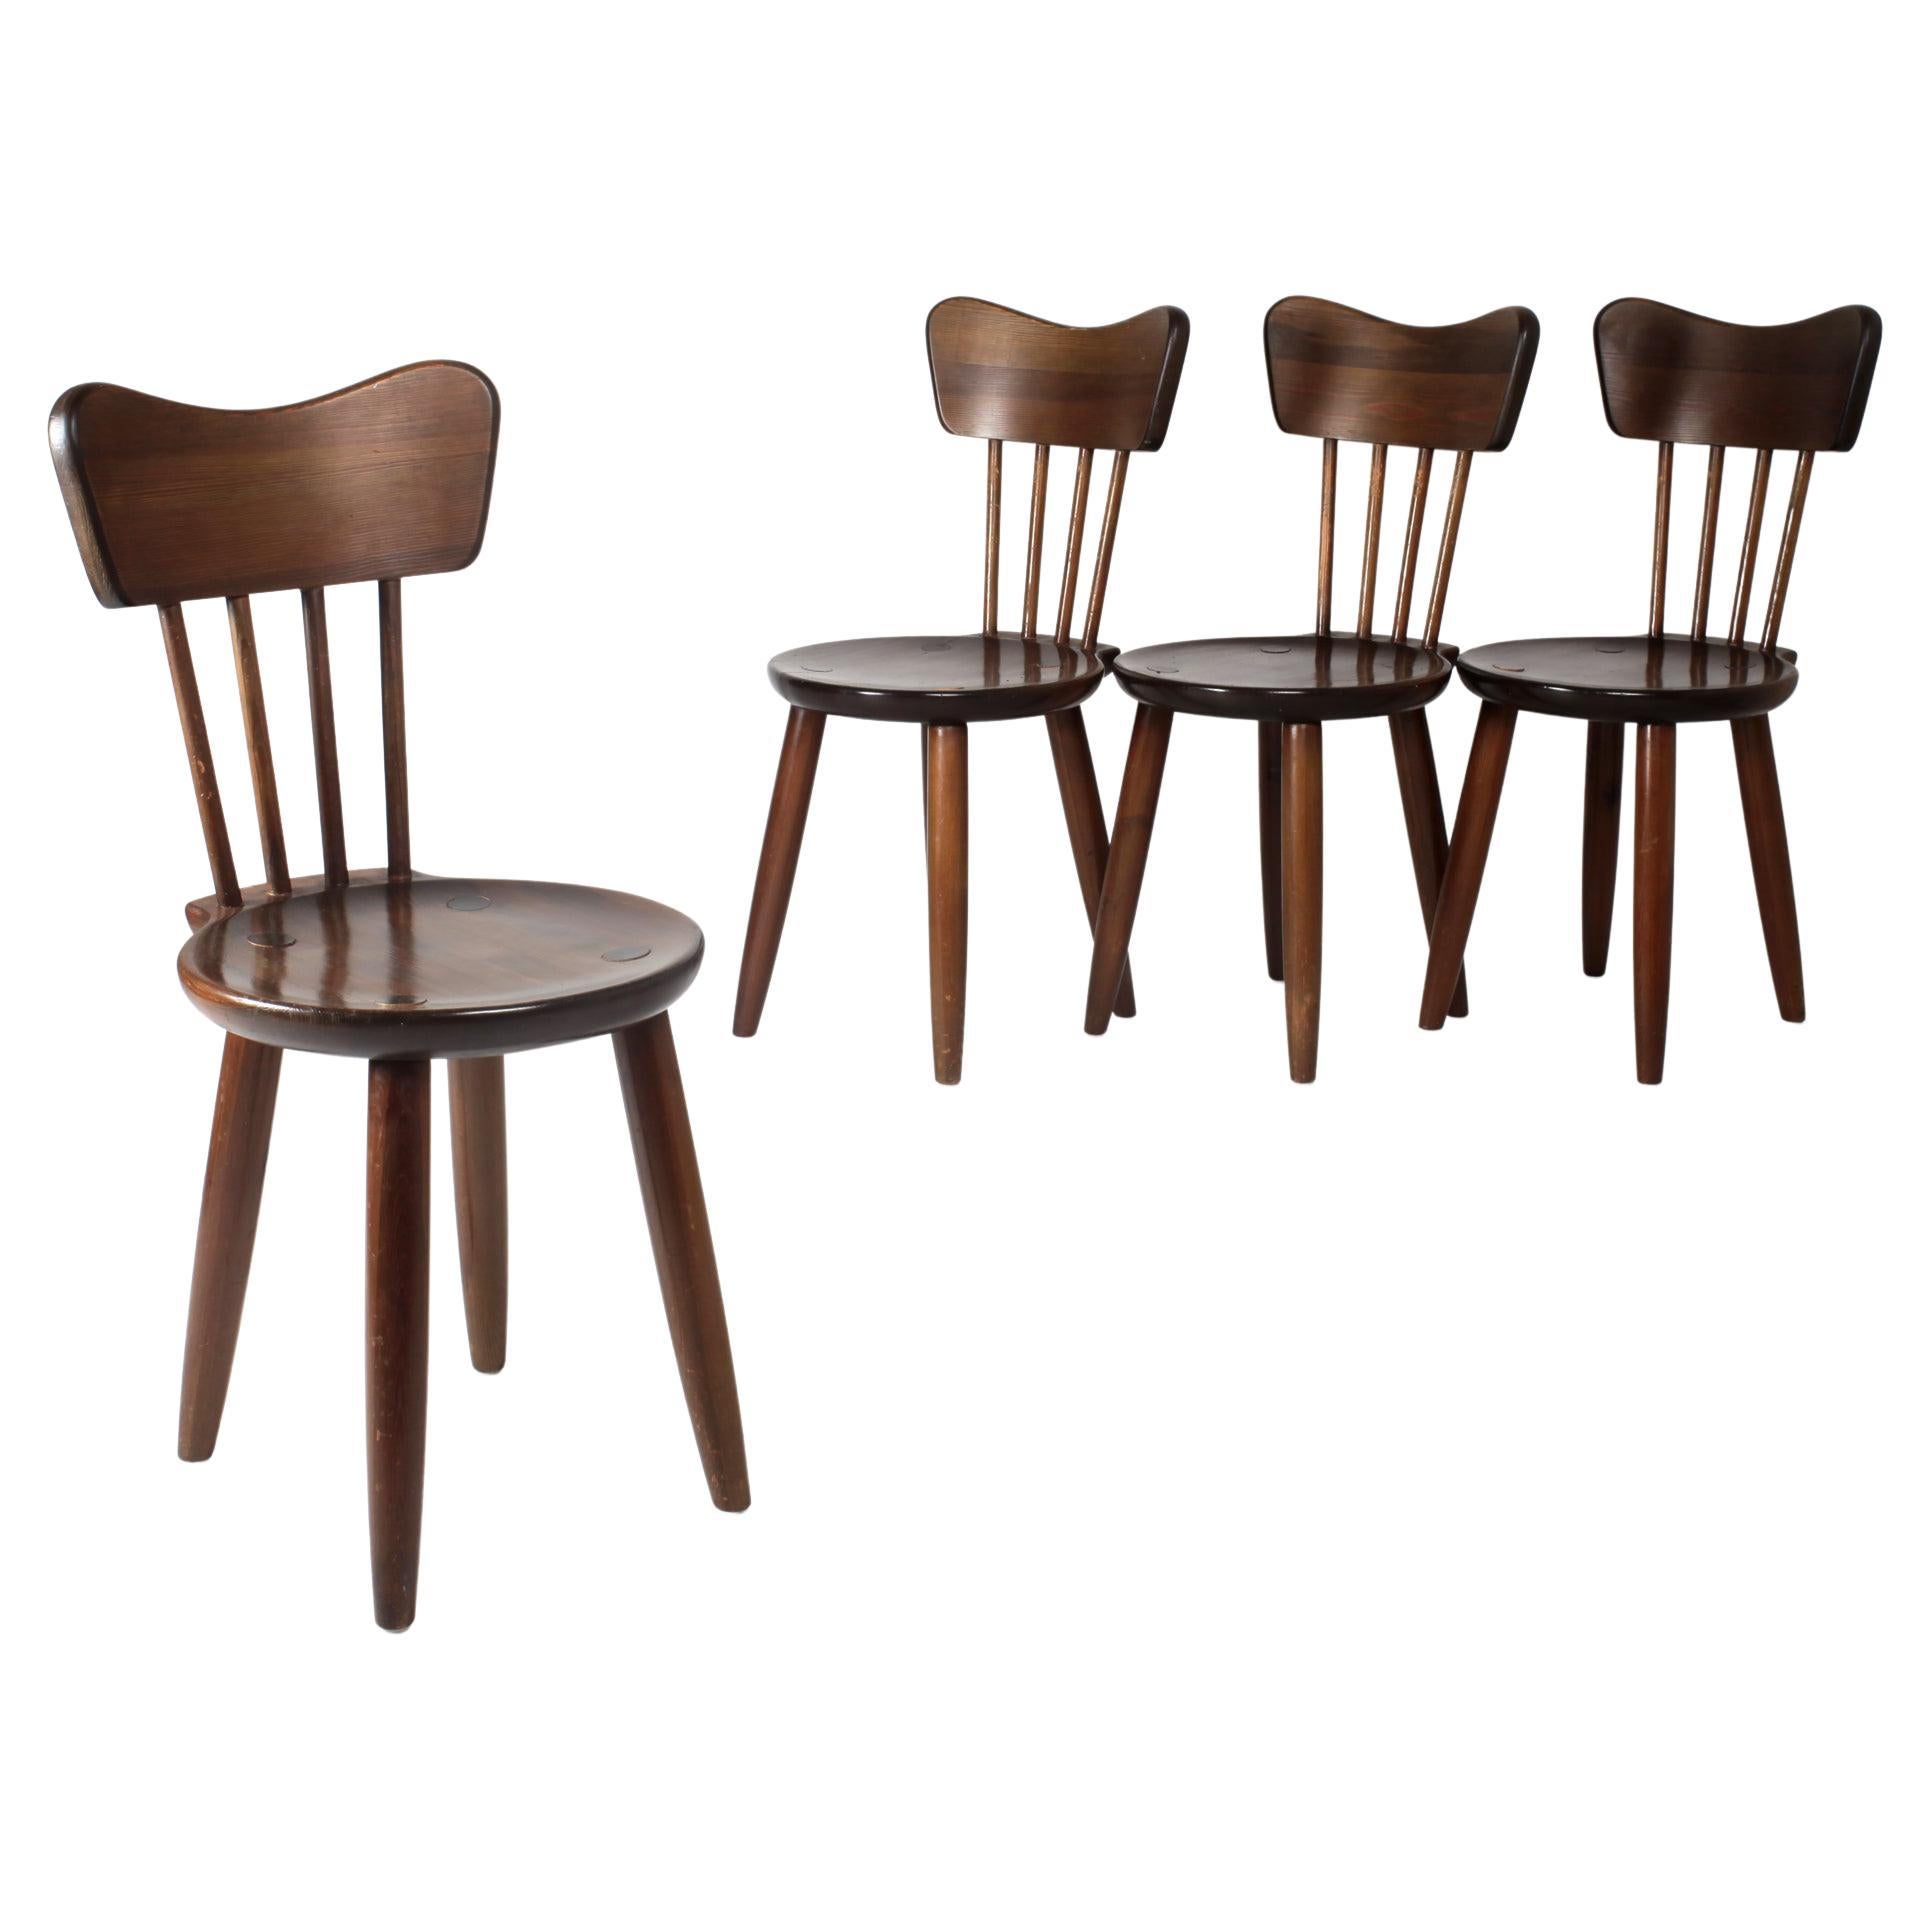 Swedish Chairs in Solid Pine Wood 1930 by Torsten Claeson For Sale